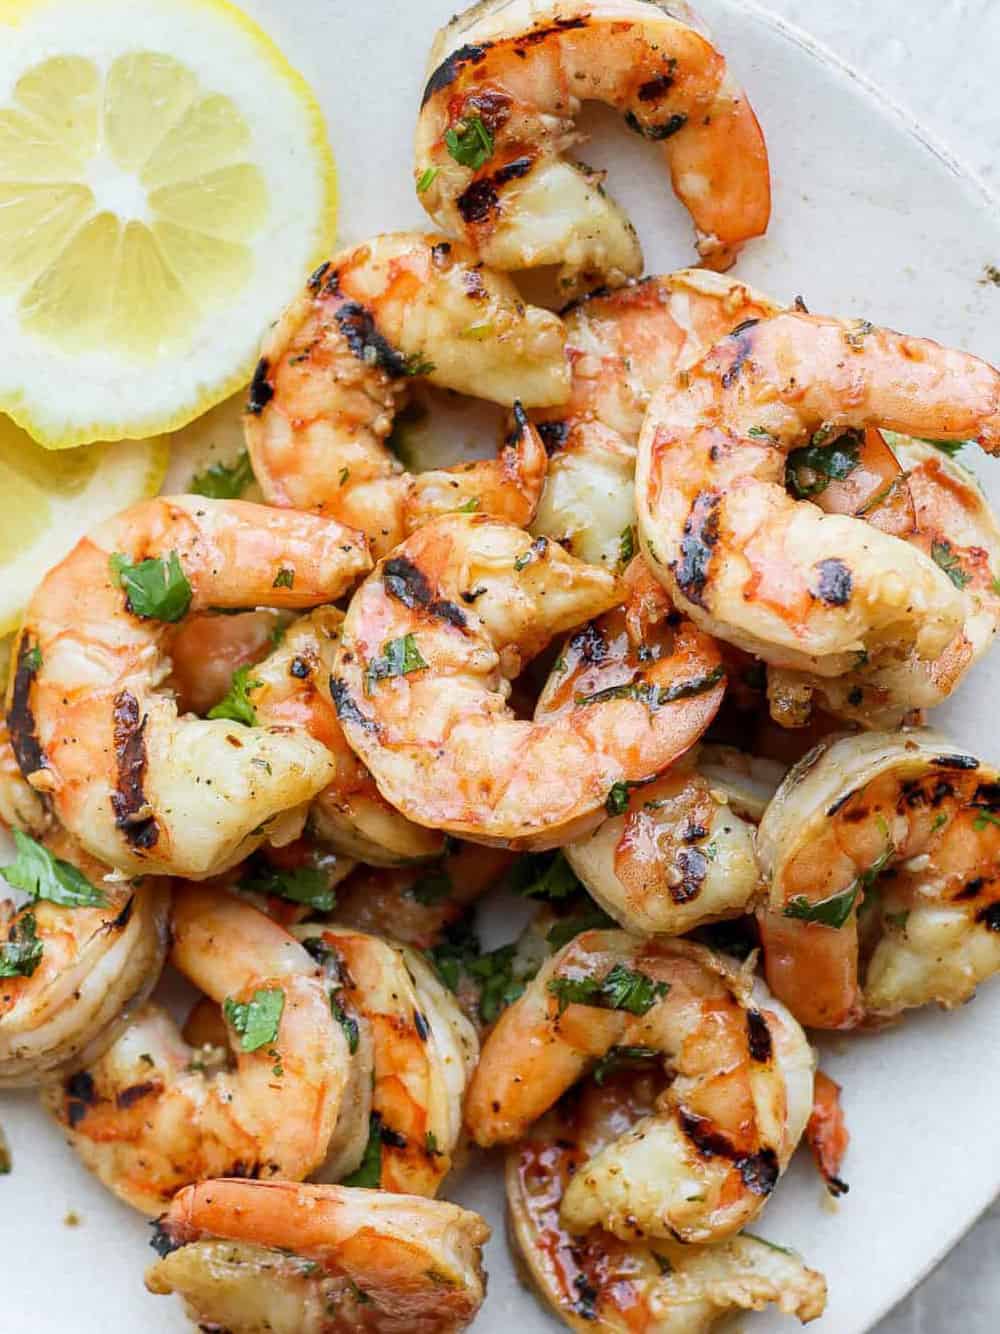 How to Grill Shrimp